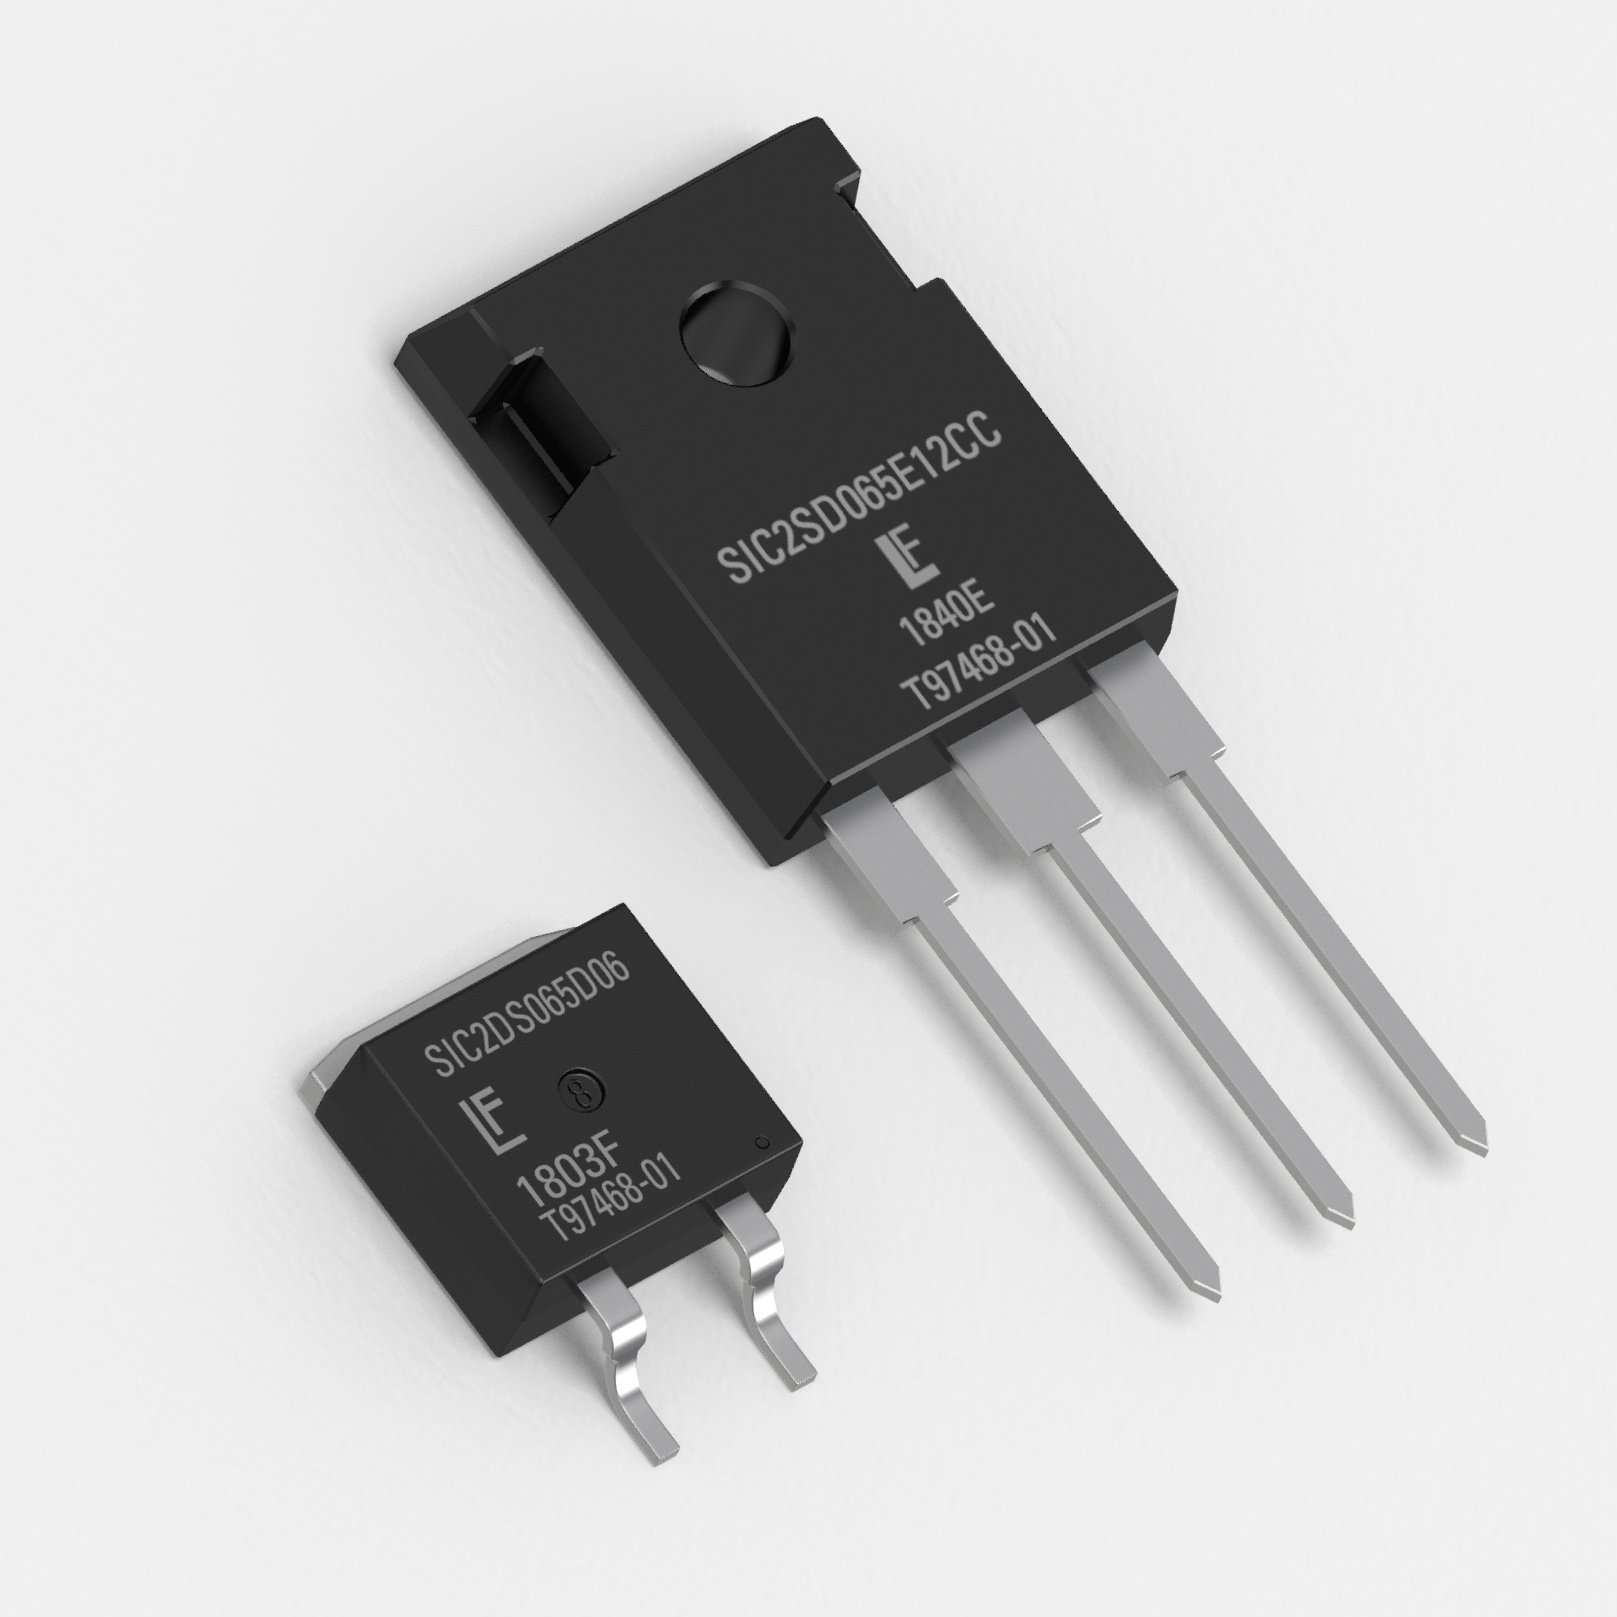 Littelfuse adds two 650V AEC-Q101-qualified silicon carbide SiC Schottky Diodes 